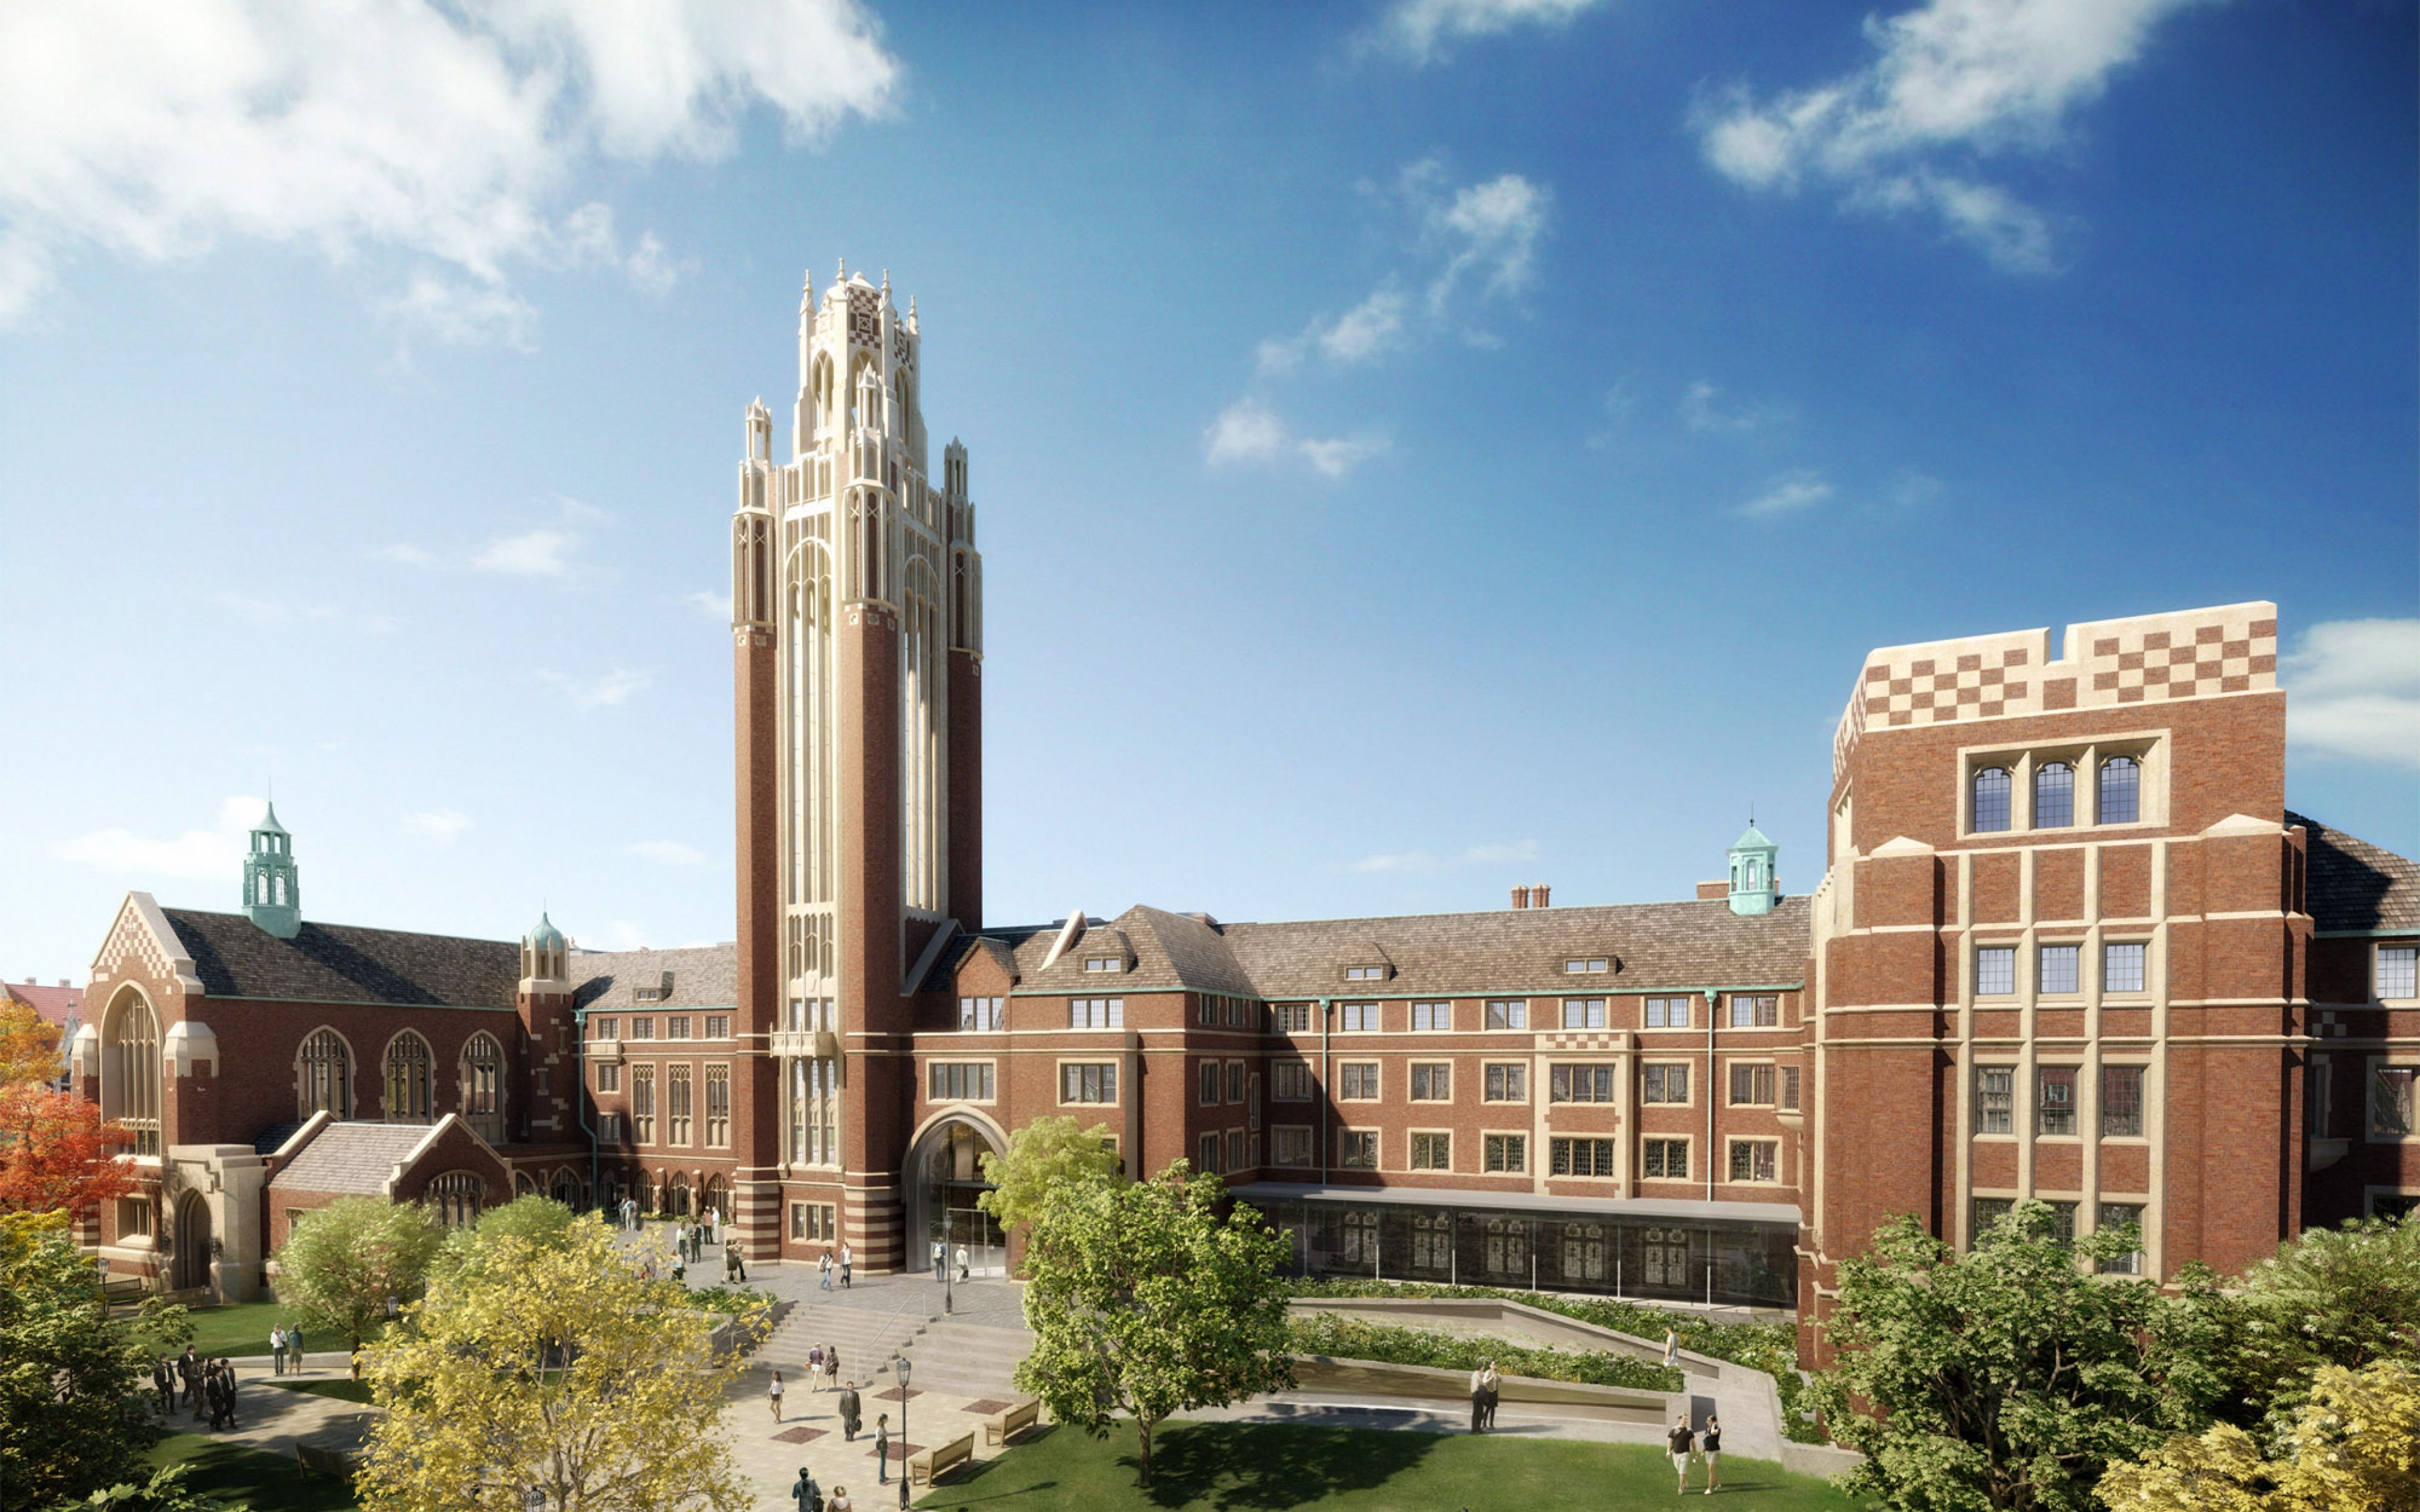 Download Wallpaper 3840x2400 University of chicago, Chicago ...